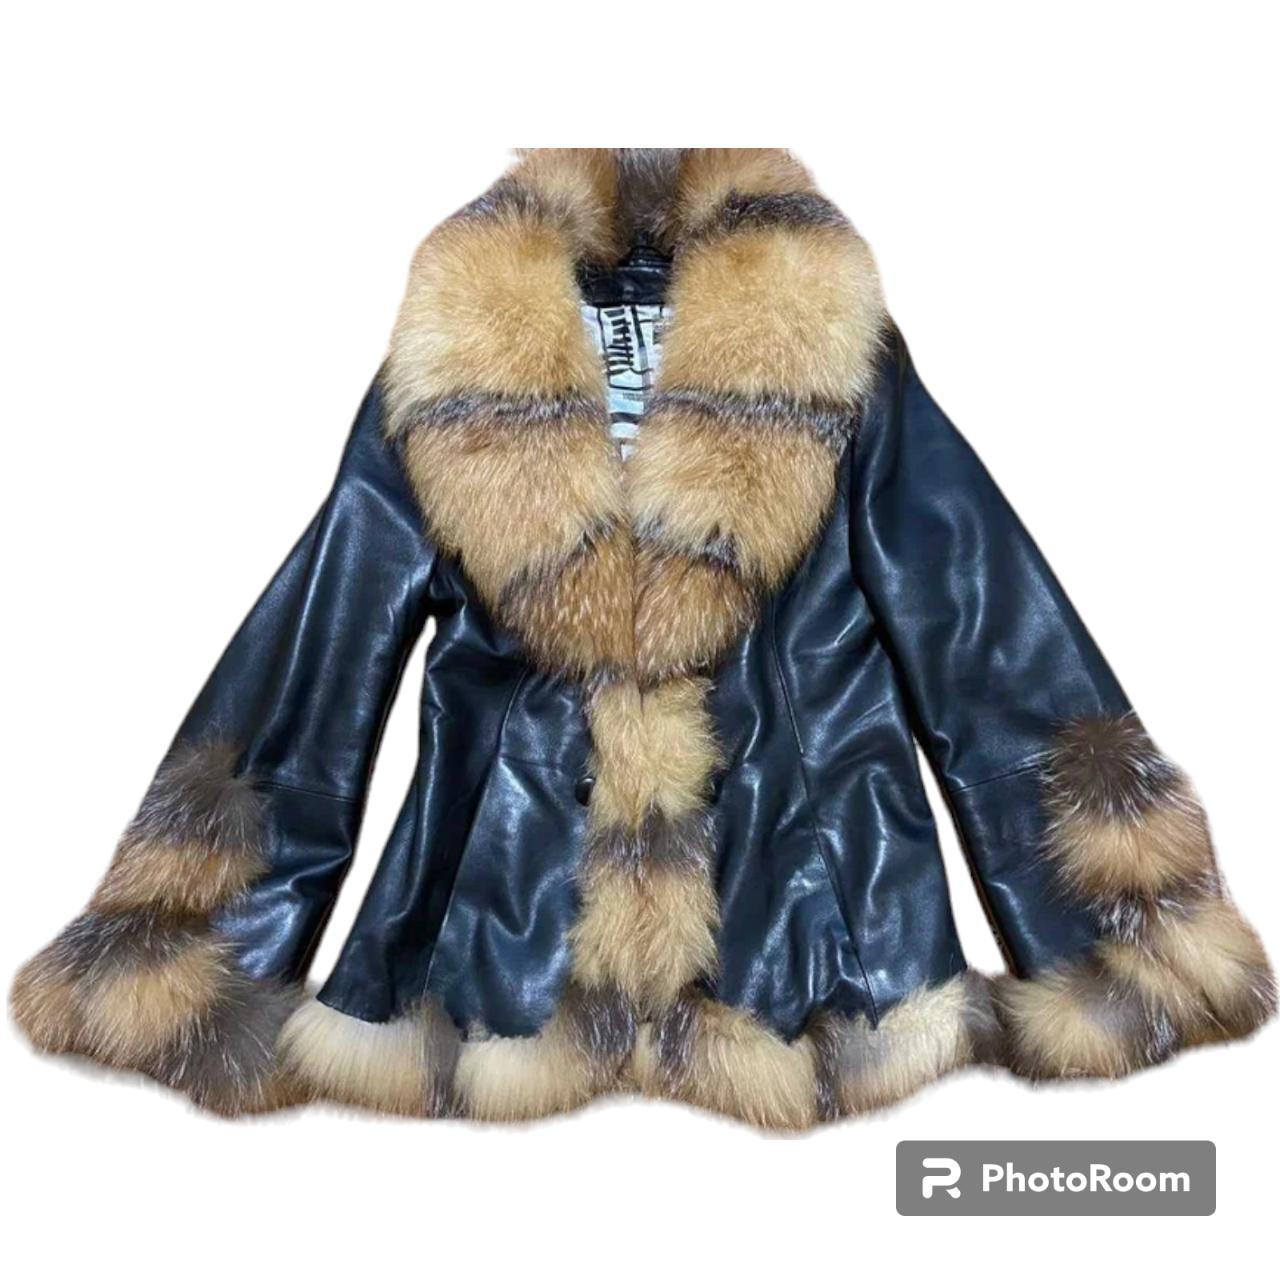 Real fur leather coat sz S real fur and... - Depop